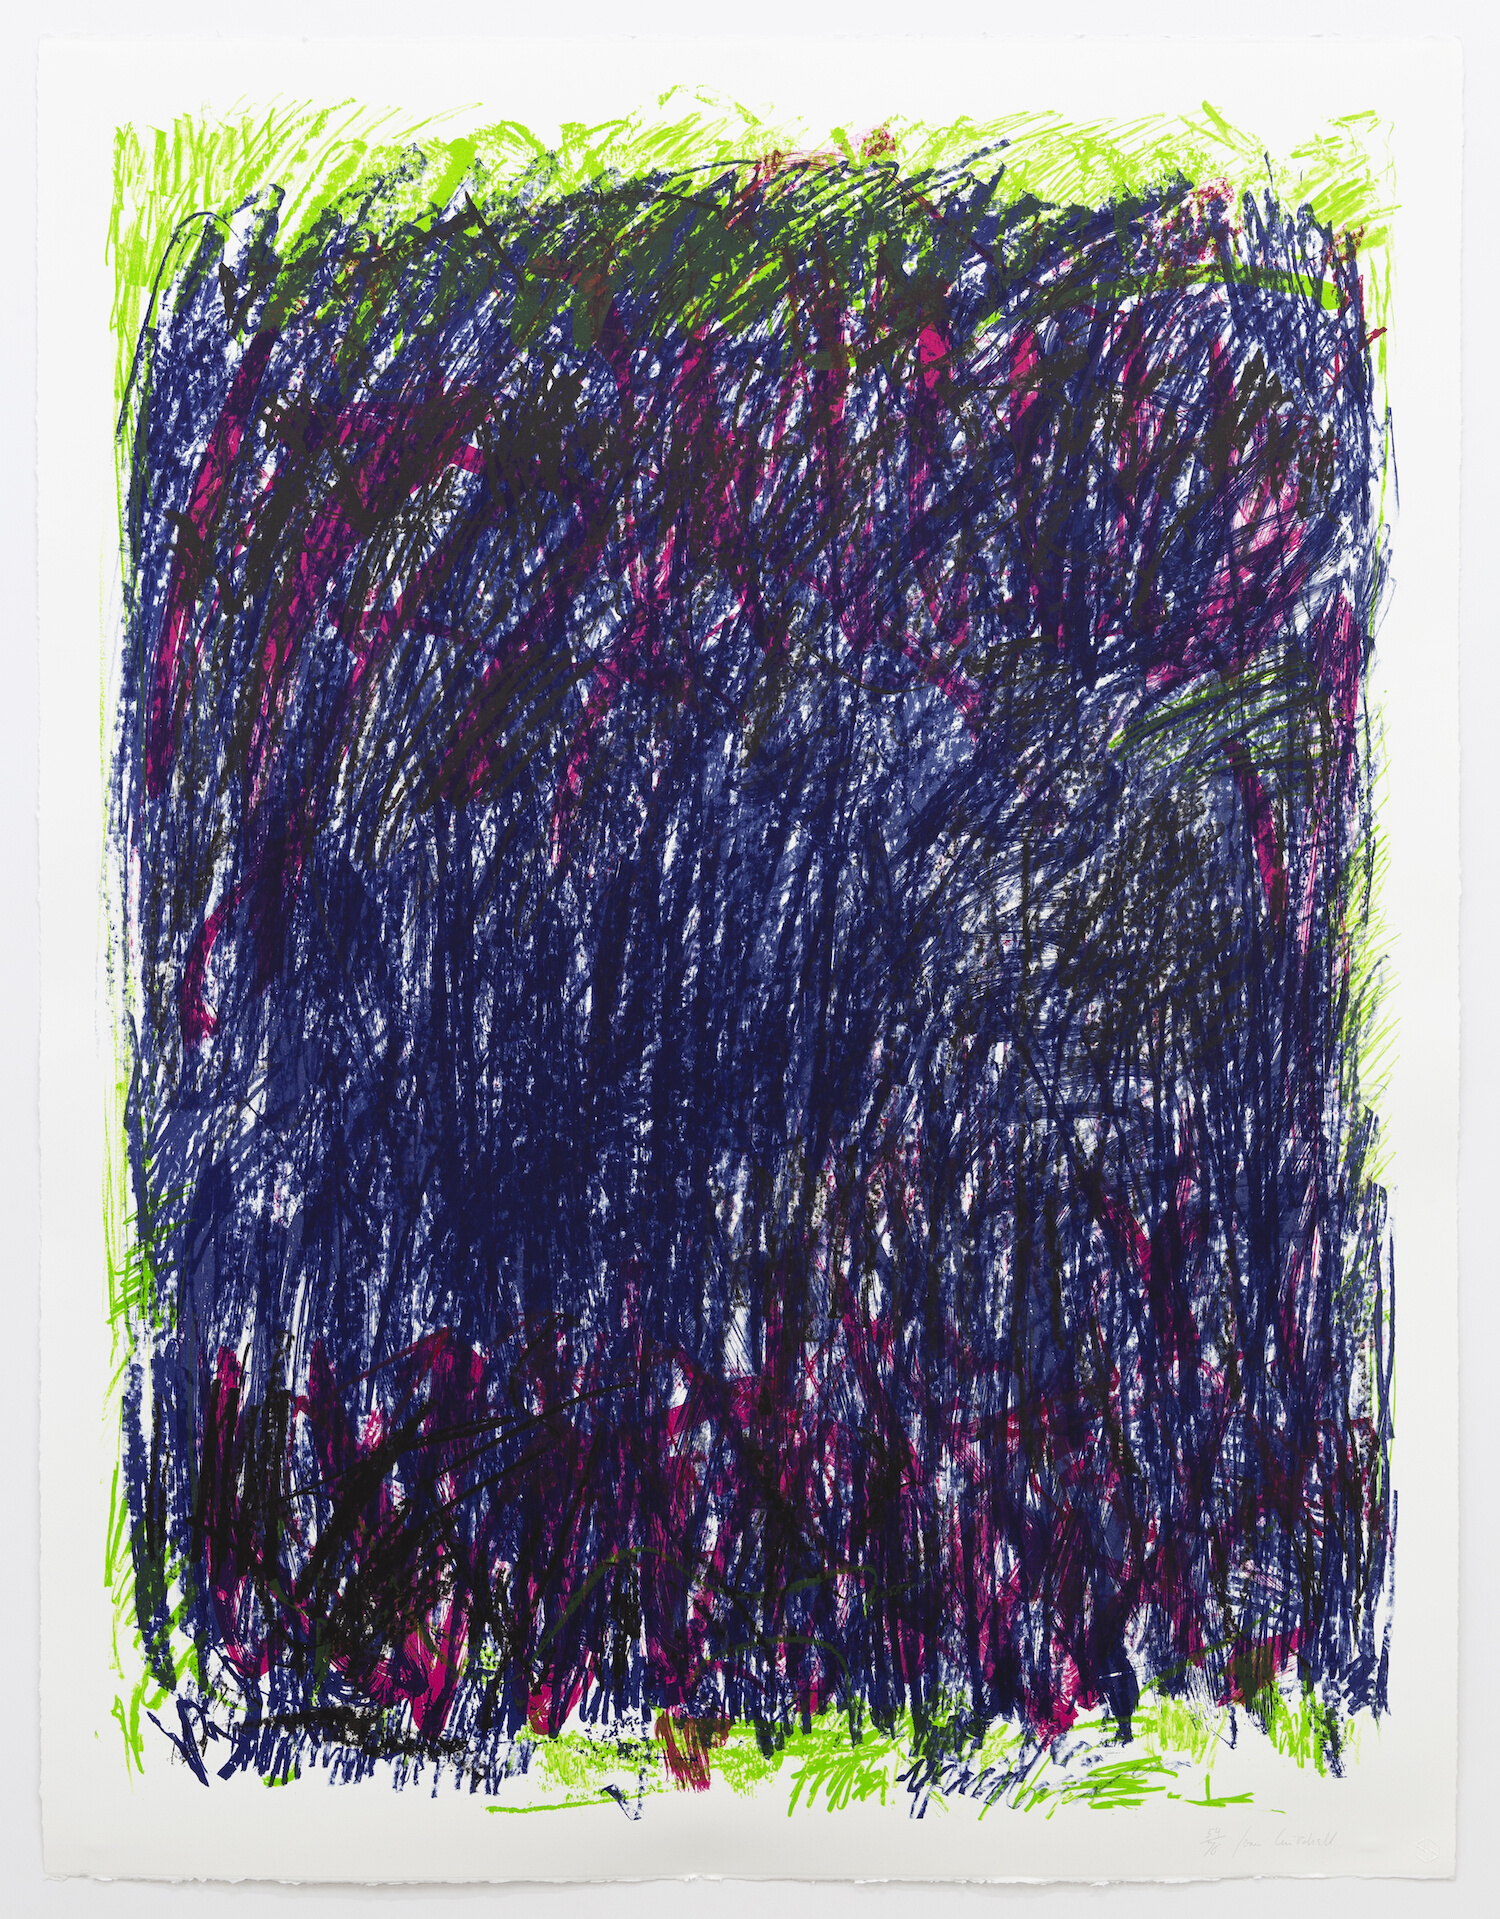 Joan Mitchell Bedford II, 1981 Lithograph Image Dimensions: 42 1/2 x 32 1/2 inches Edition of 70